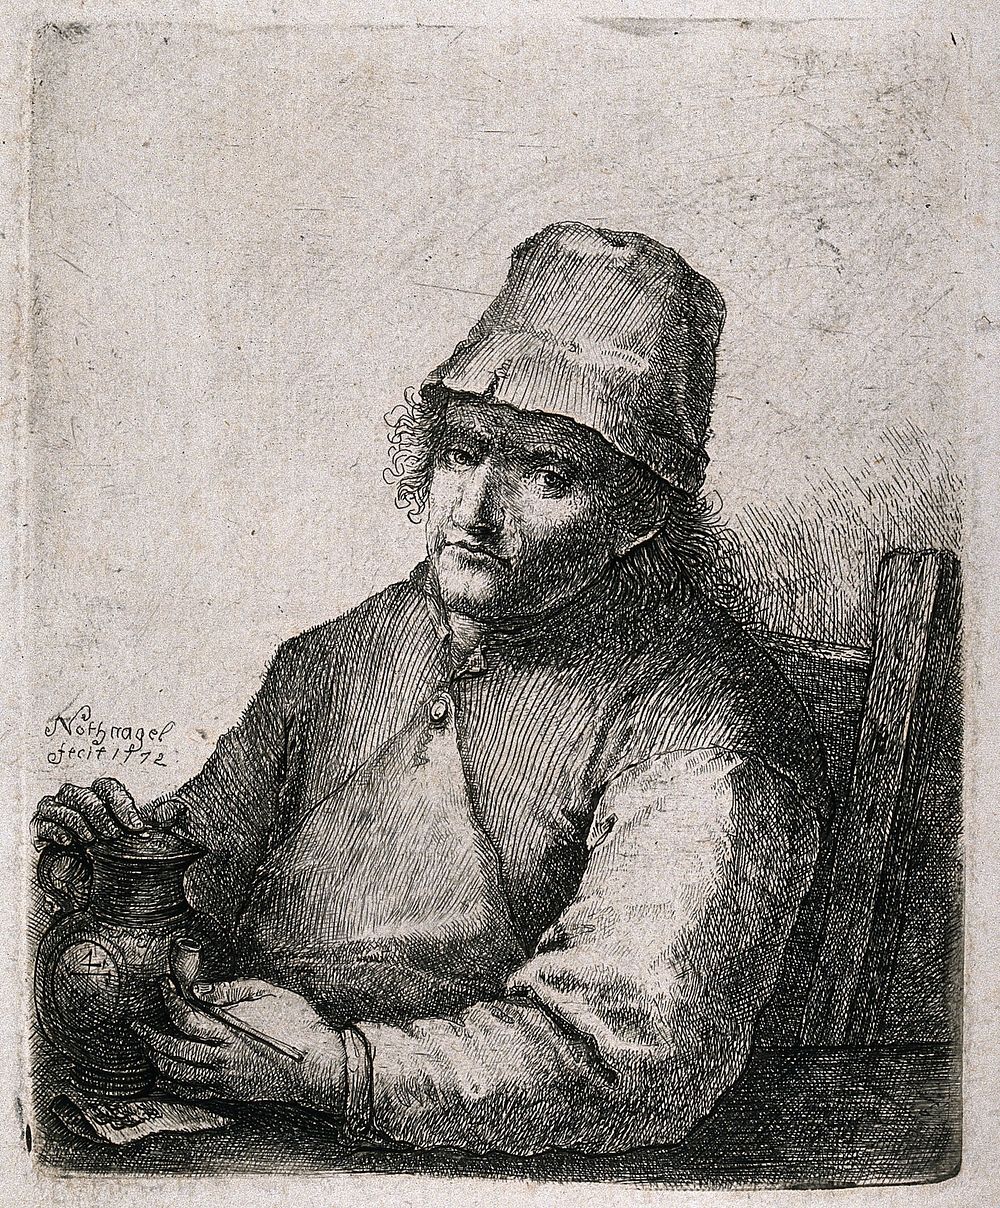 A man sits looking glum and holding his pipe and beer jug. Etching by J. Nothnagel, 1772.